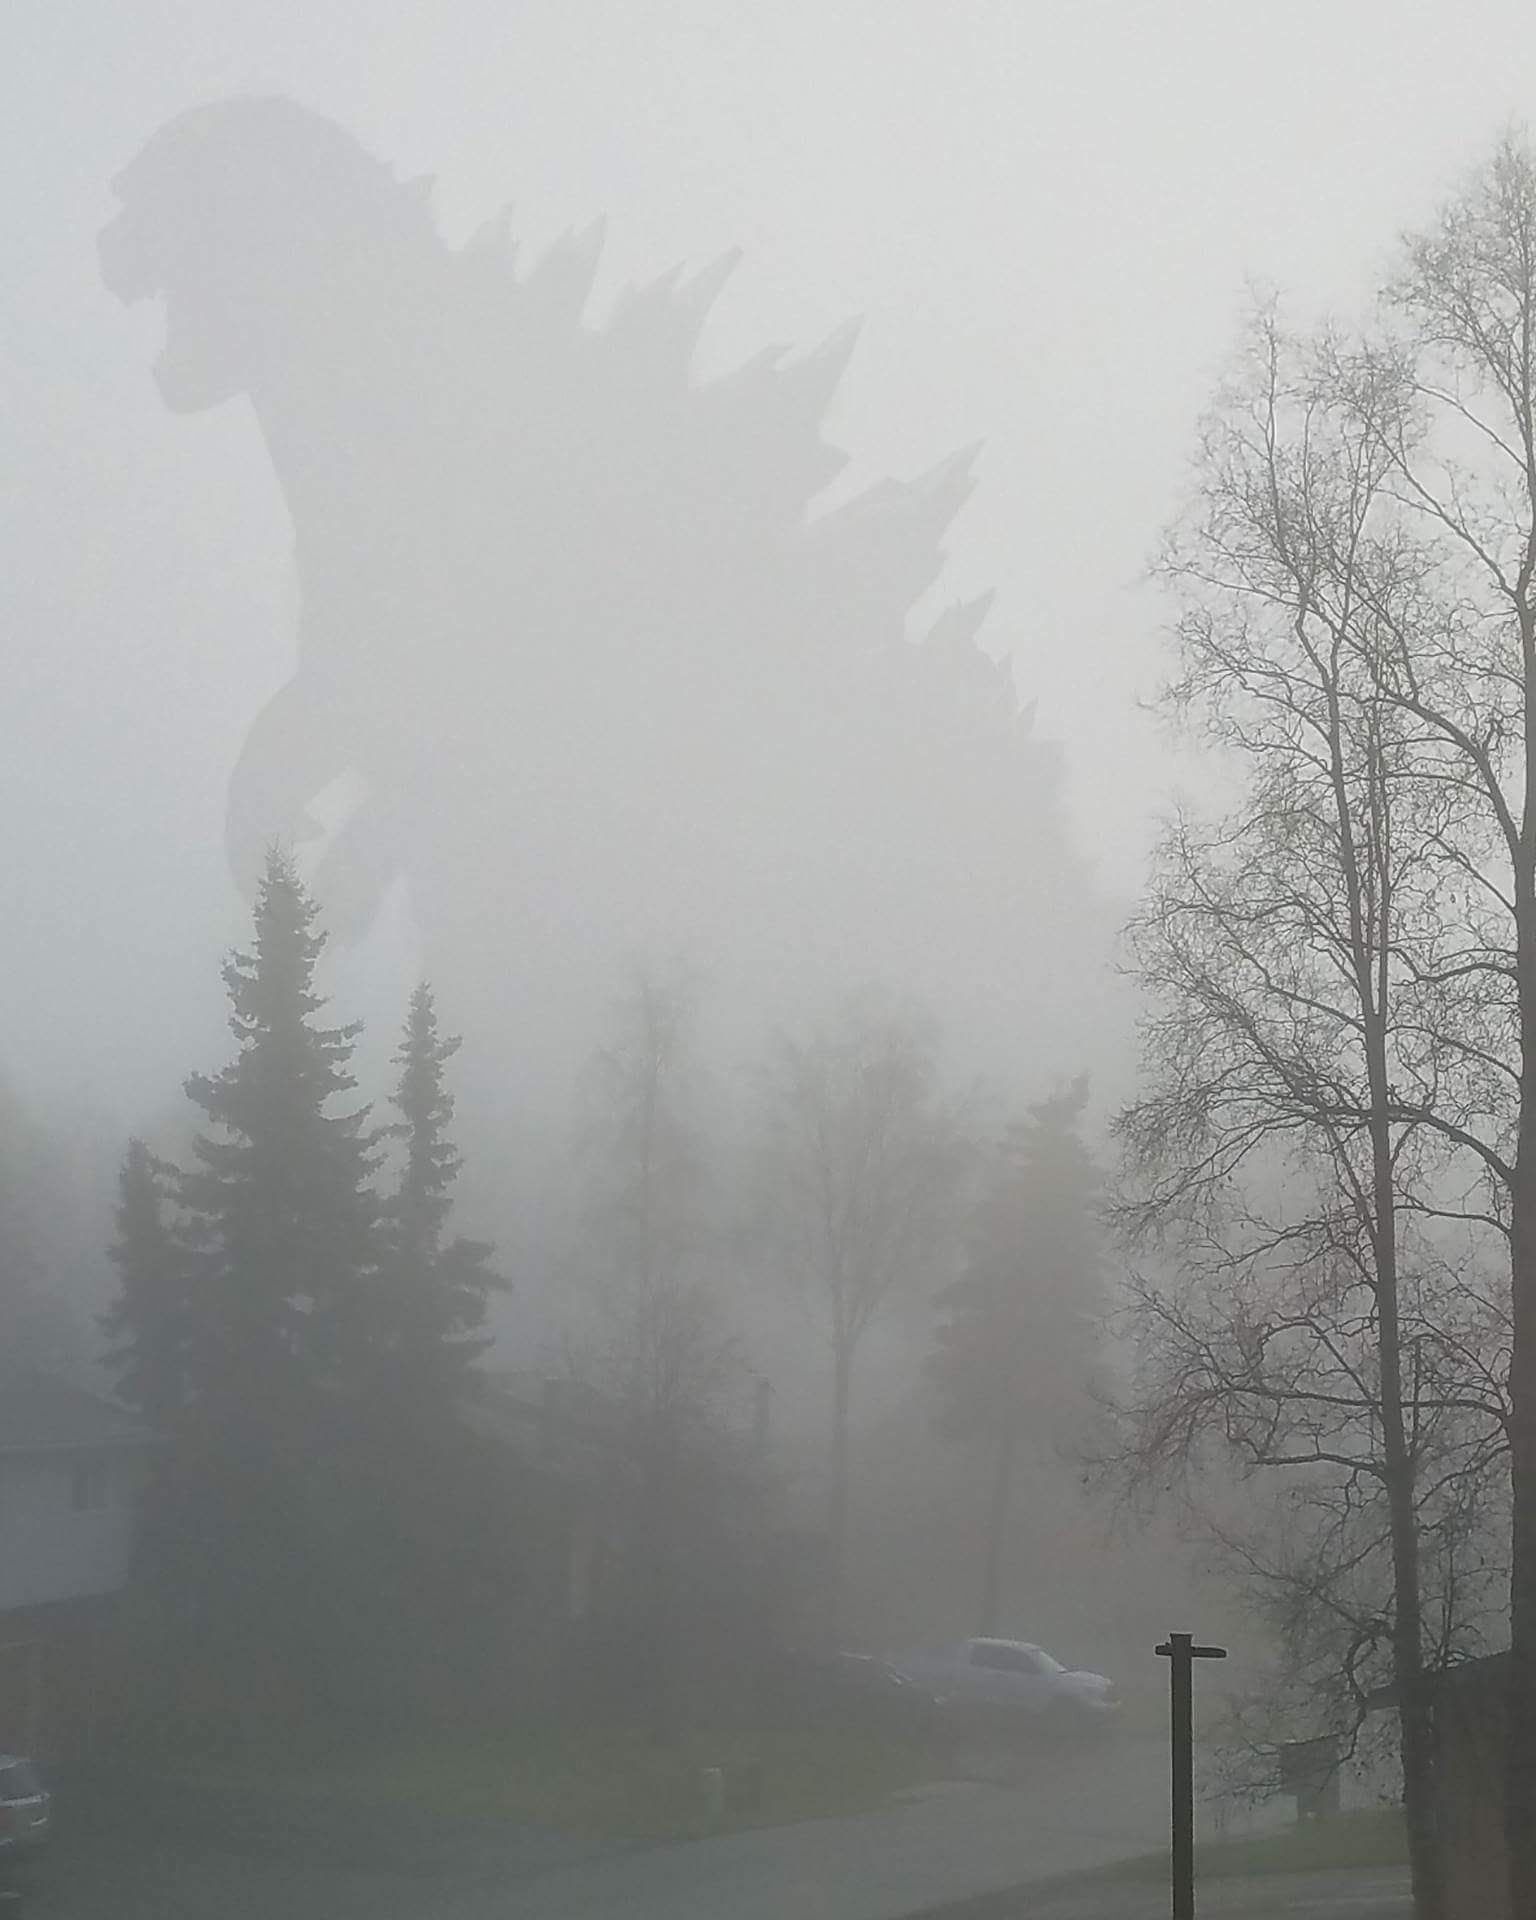 It was foggy the last 2 days. Decided to make my fear as a kid come to life.